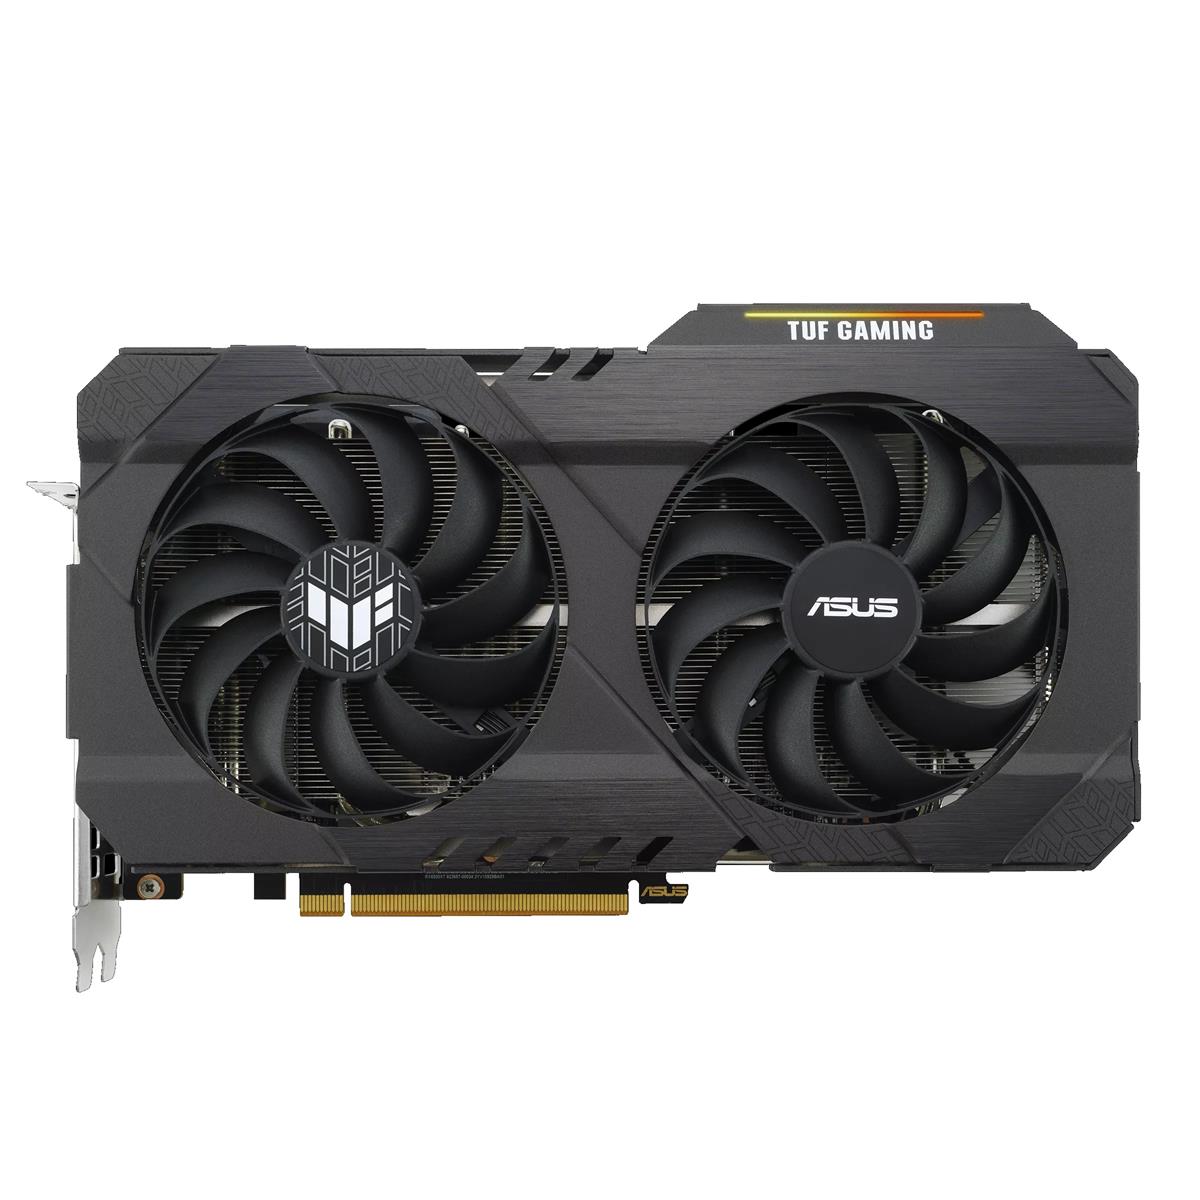 ASUS TUF Gaming Radeon RX 6500 XT OC Edition 4GB supreme GDDR6 durability and stalwart of cooling